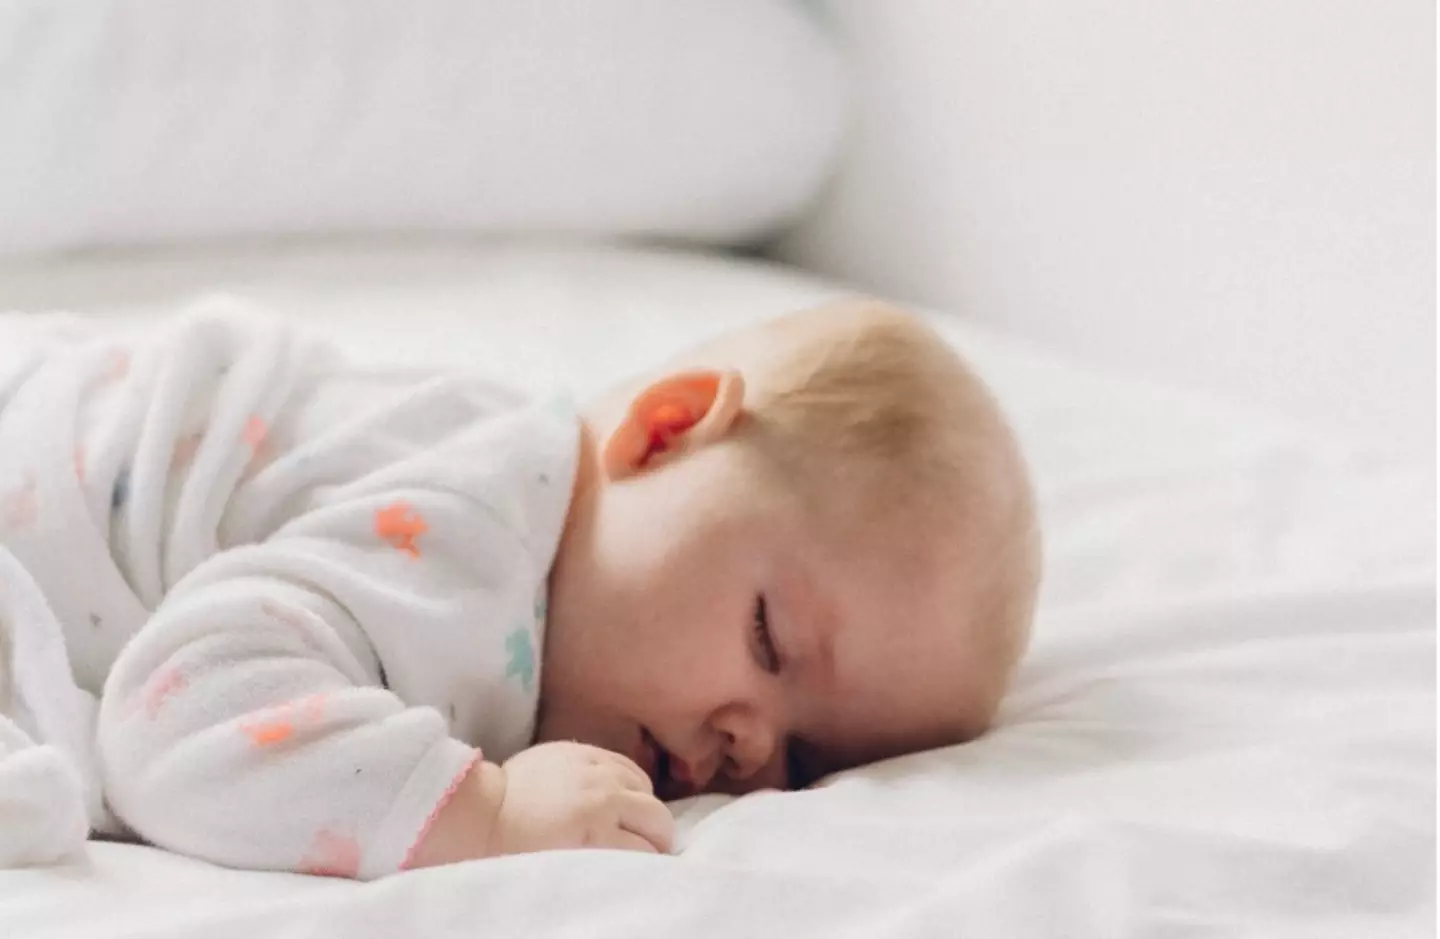 A cheeky mum has revealed the 'genius' way she managed to get a good night's sleep.